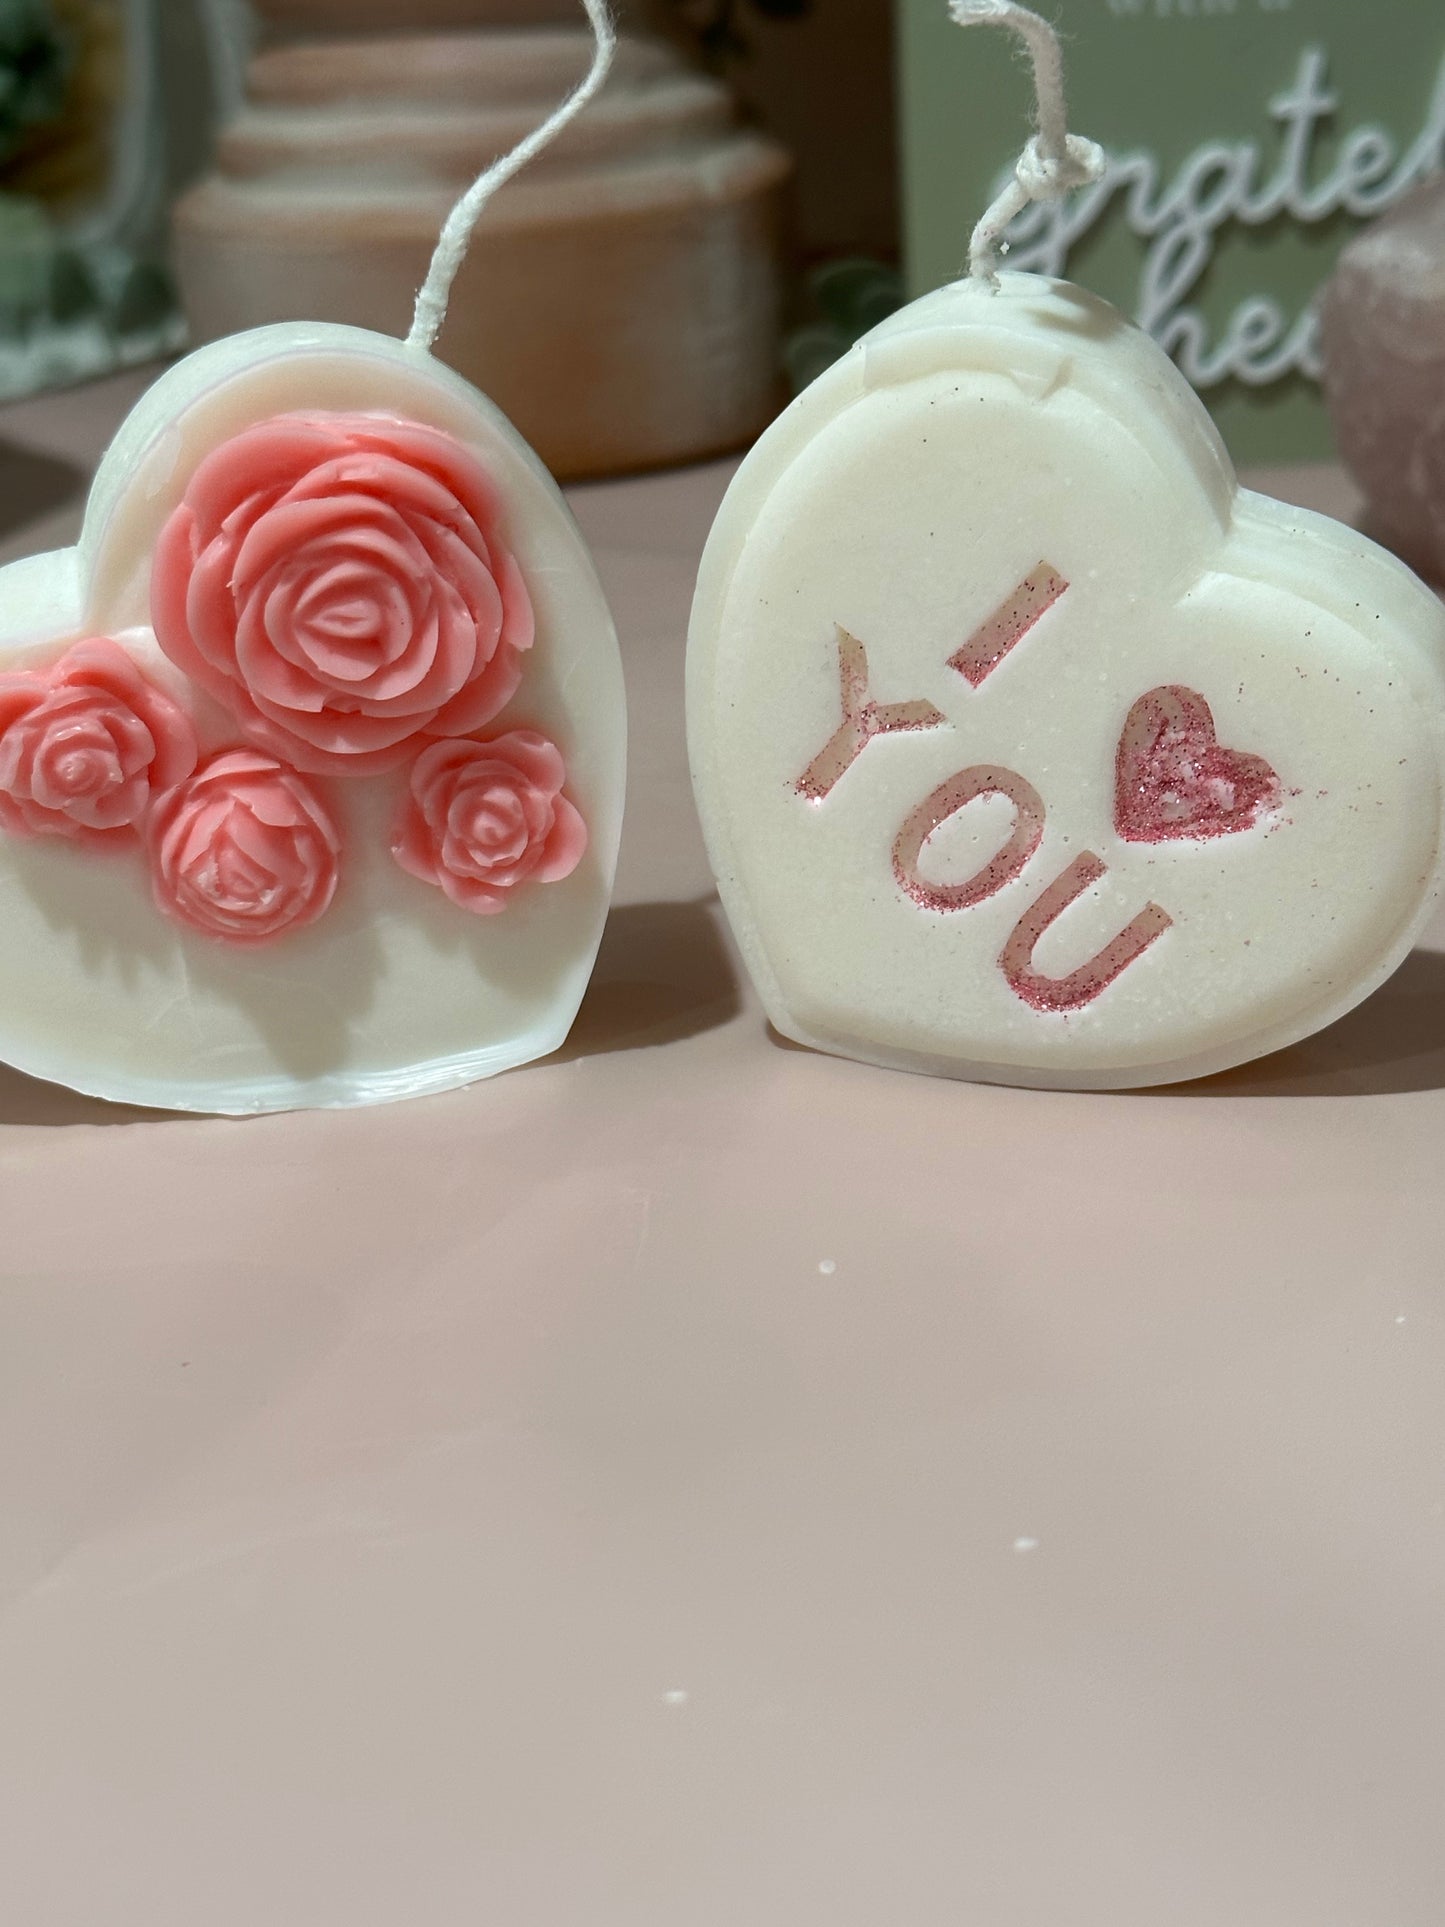 Valentines Heart Candle, 2 "I Love You" Candle/Floral Heart Candle, Home Decor, Love Candle, White Beeswax Candle